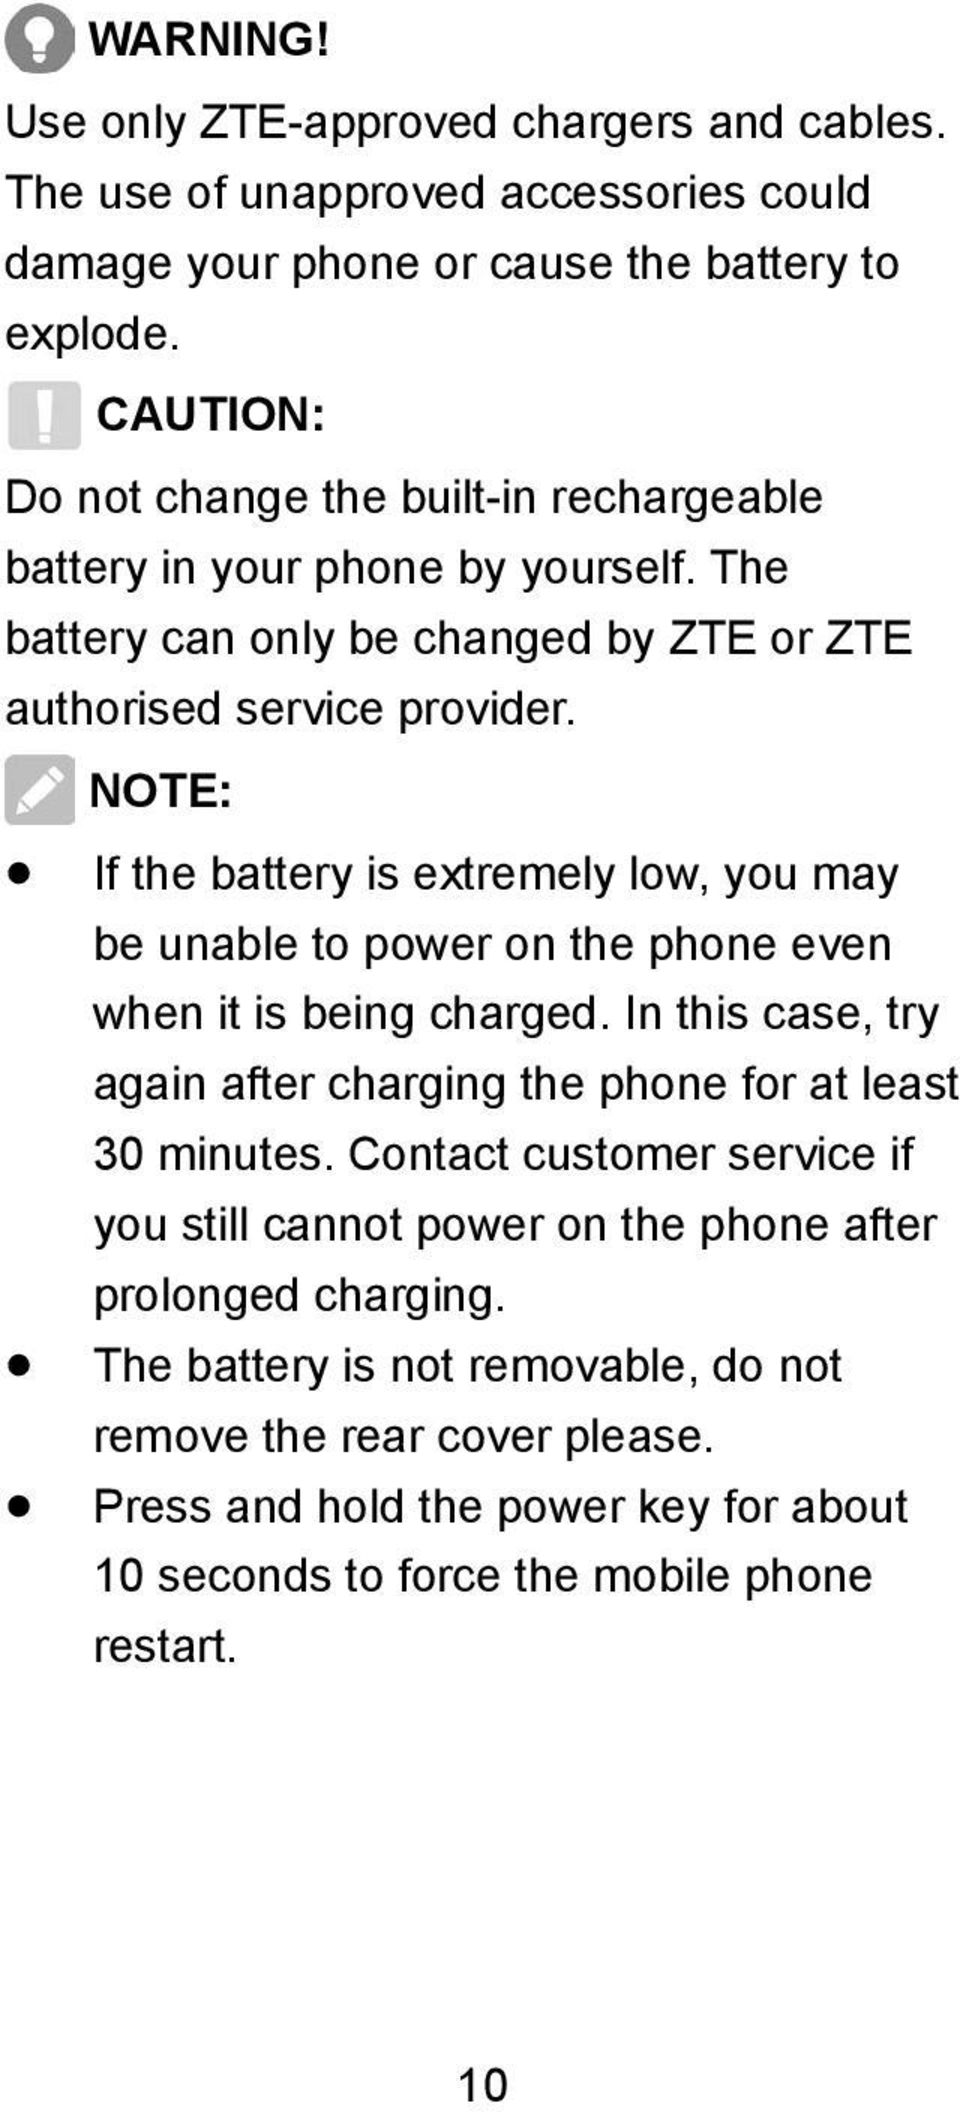 NOTE: If the battery is extremely low, you may be unable to power on the phone even when it is being charged. In this case, try again after charging the phone for at least 30 minutes.